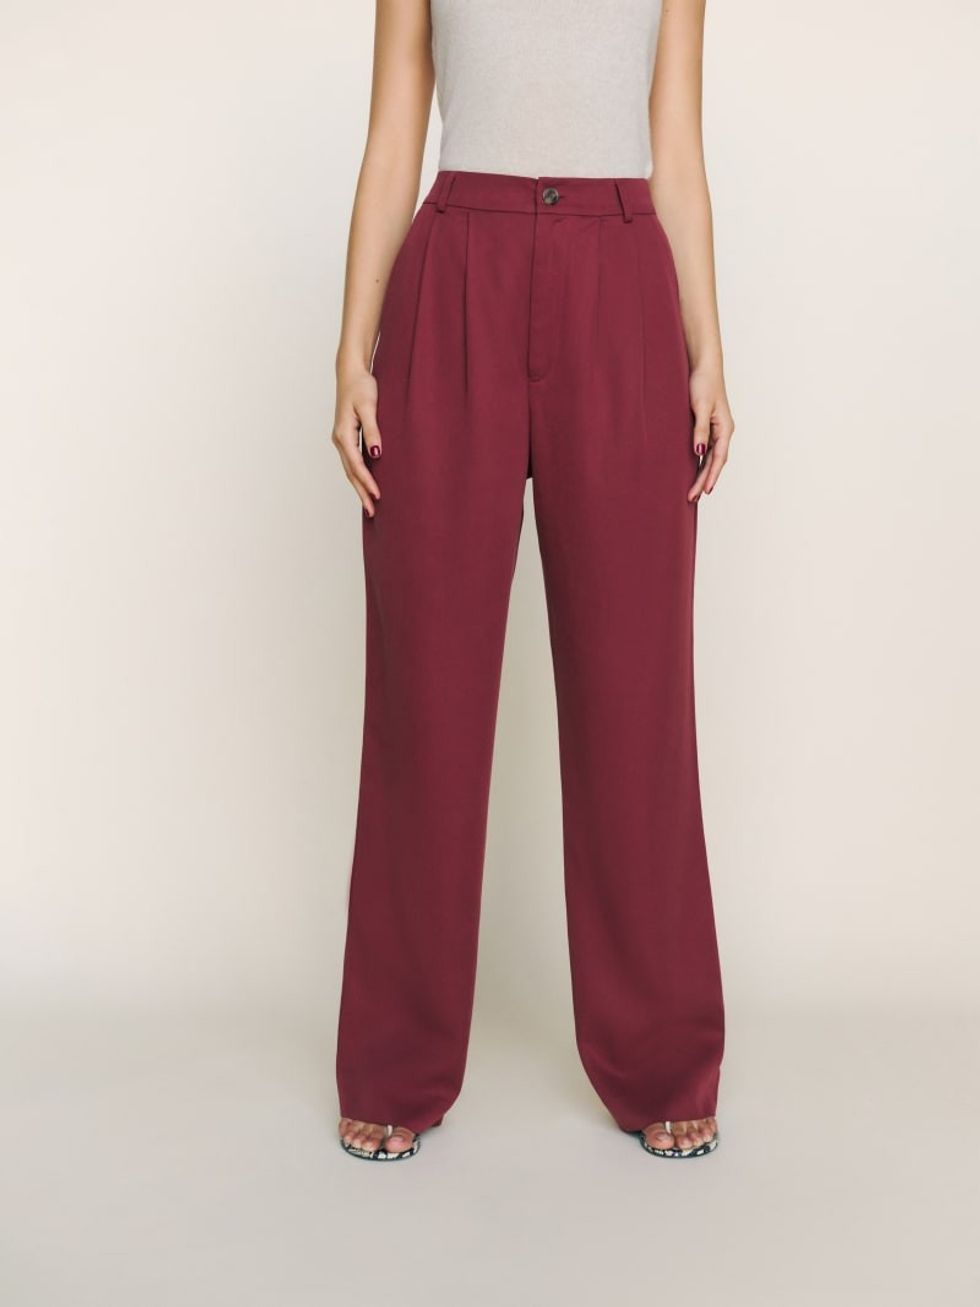 21 Pairs Of Stylish Trousers To Wear To Work - Brit + Co